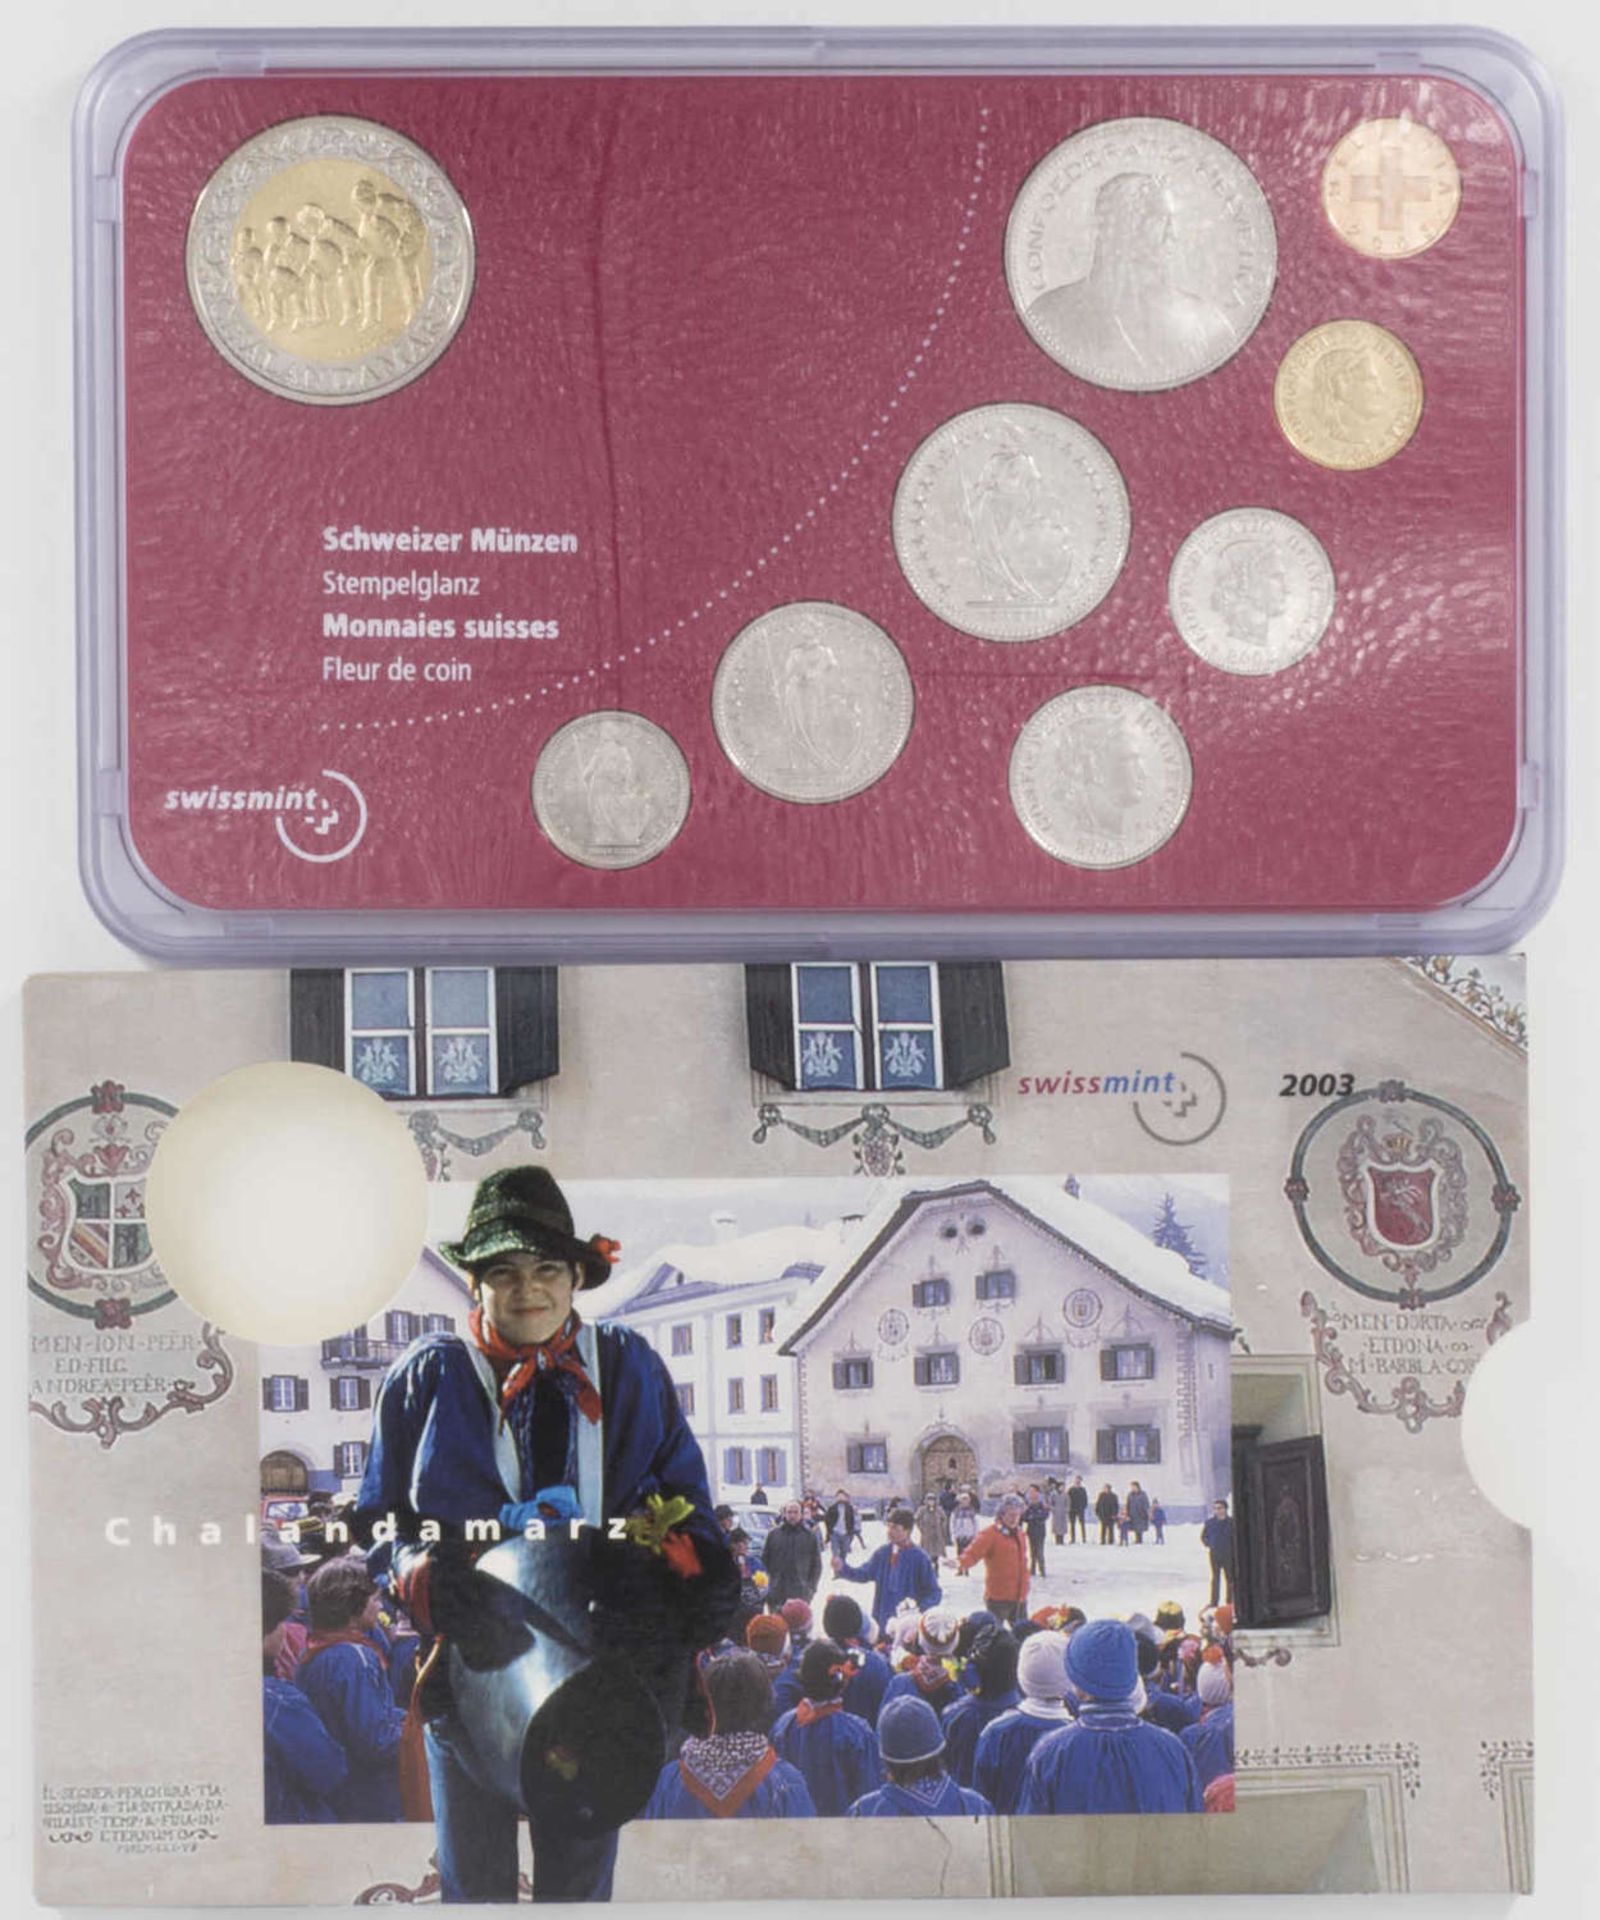 Switzerland 2003, "Chalandamarz" coin set, with a special CHF 5 coin. Condition: BU.